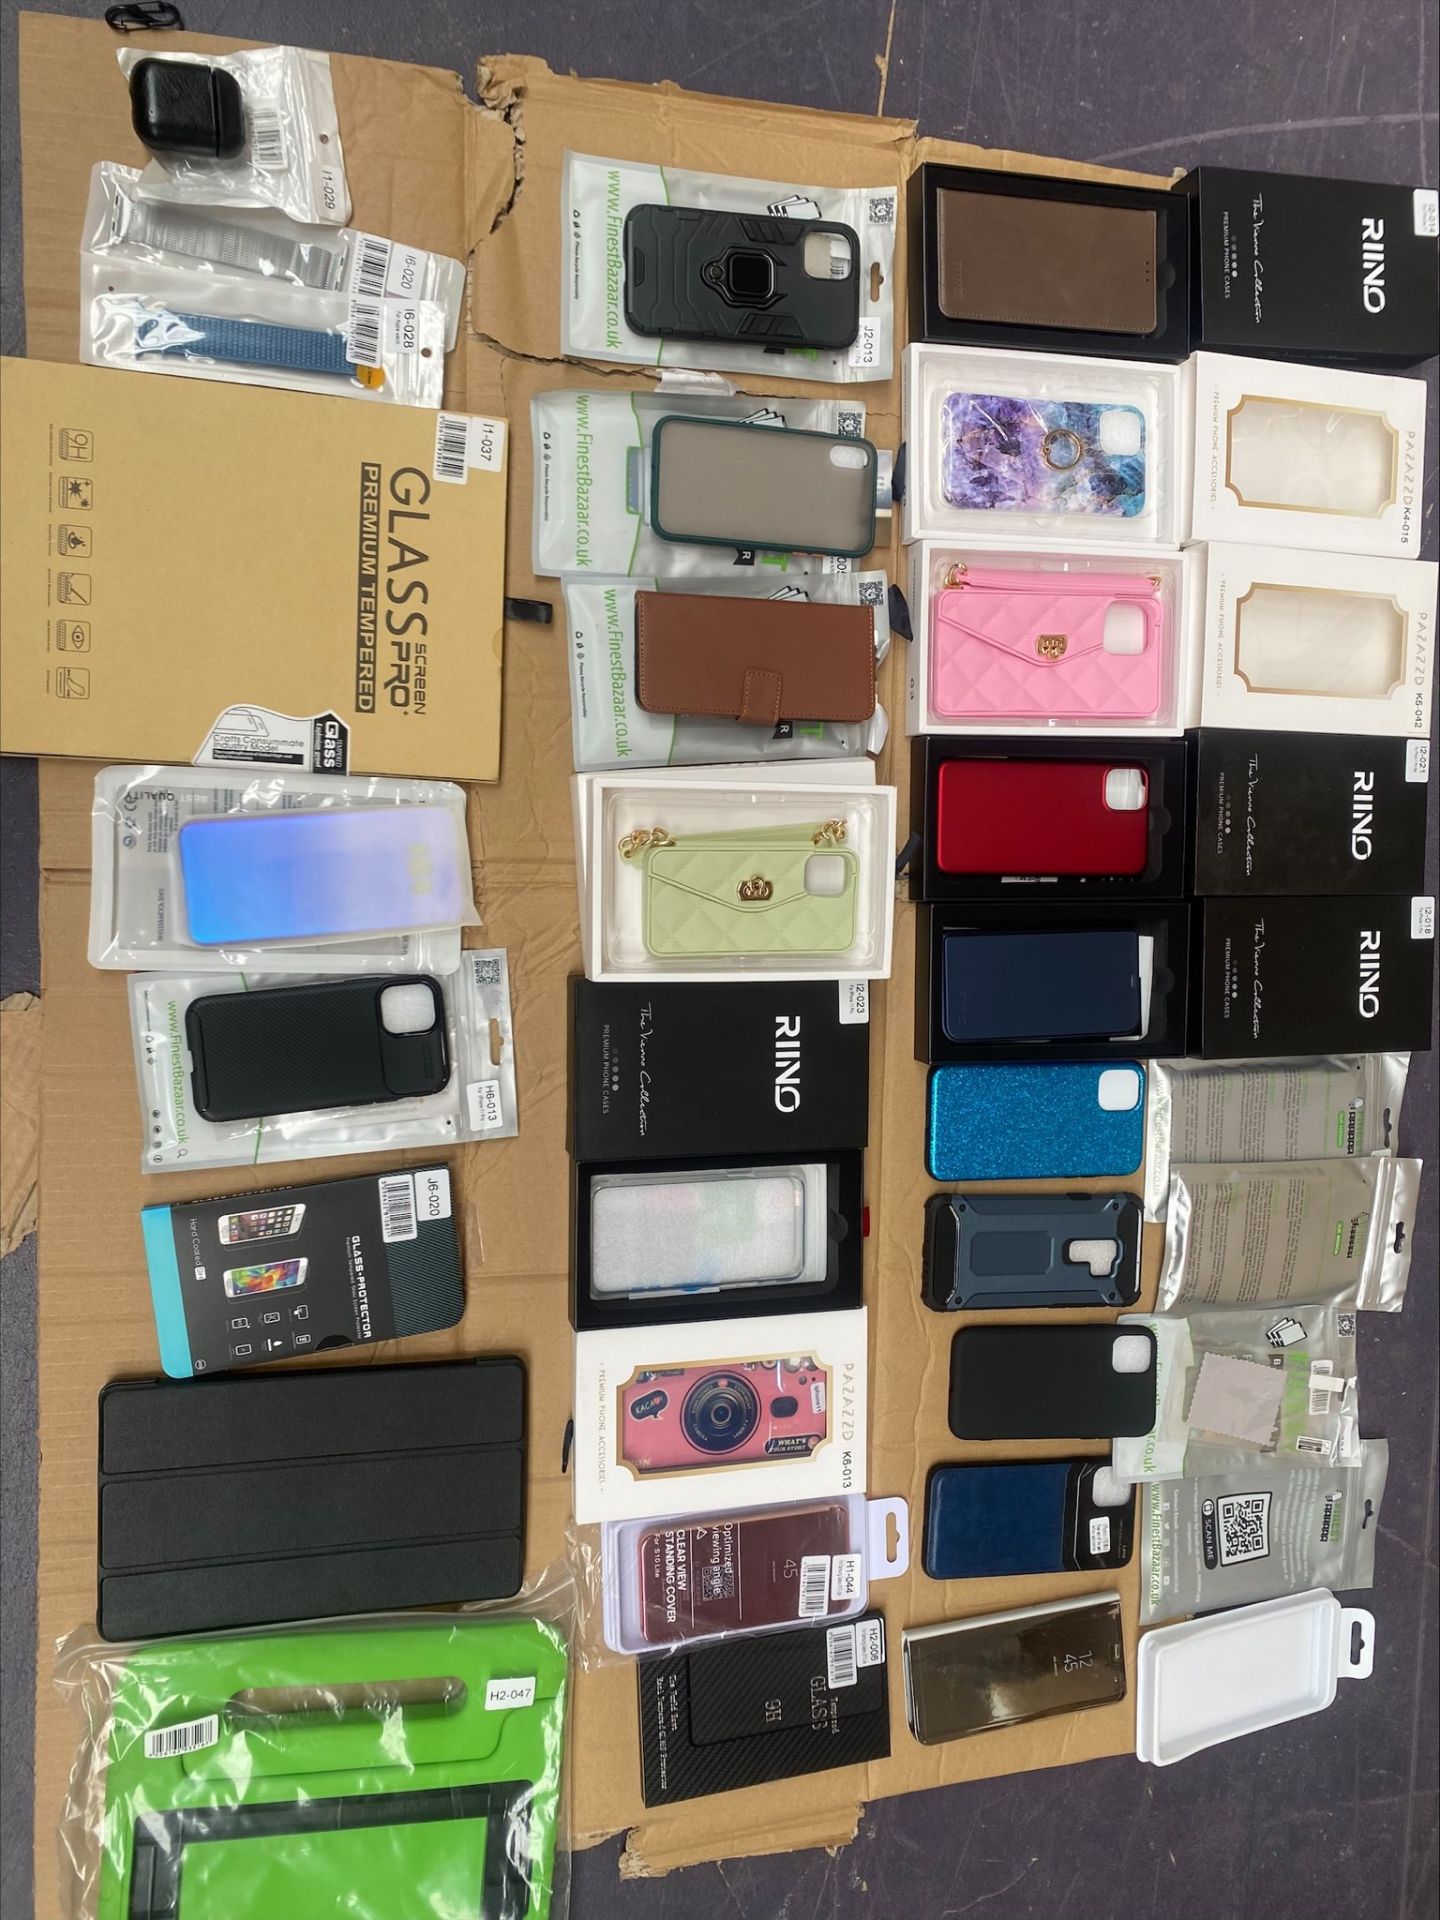 Joblot 50K Units iPhone, Samsung, Airpod, Apple Watch, Charging Cables, Phone Covers Accessories - Image 49 of 52